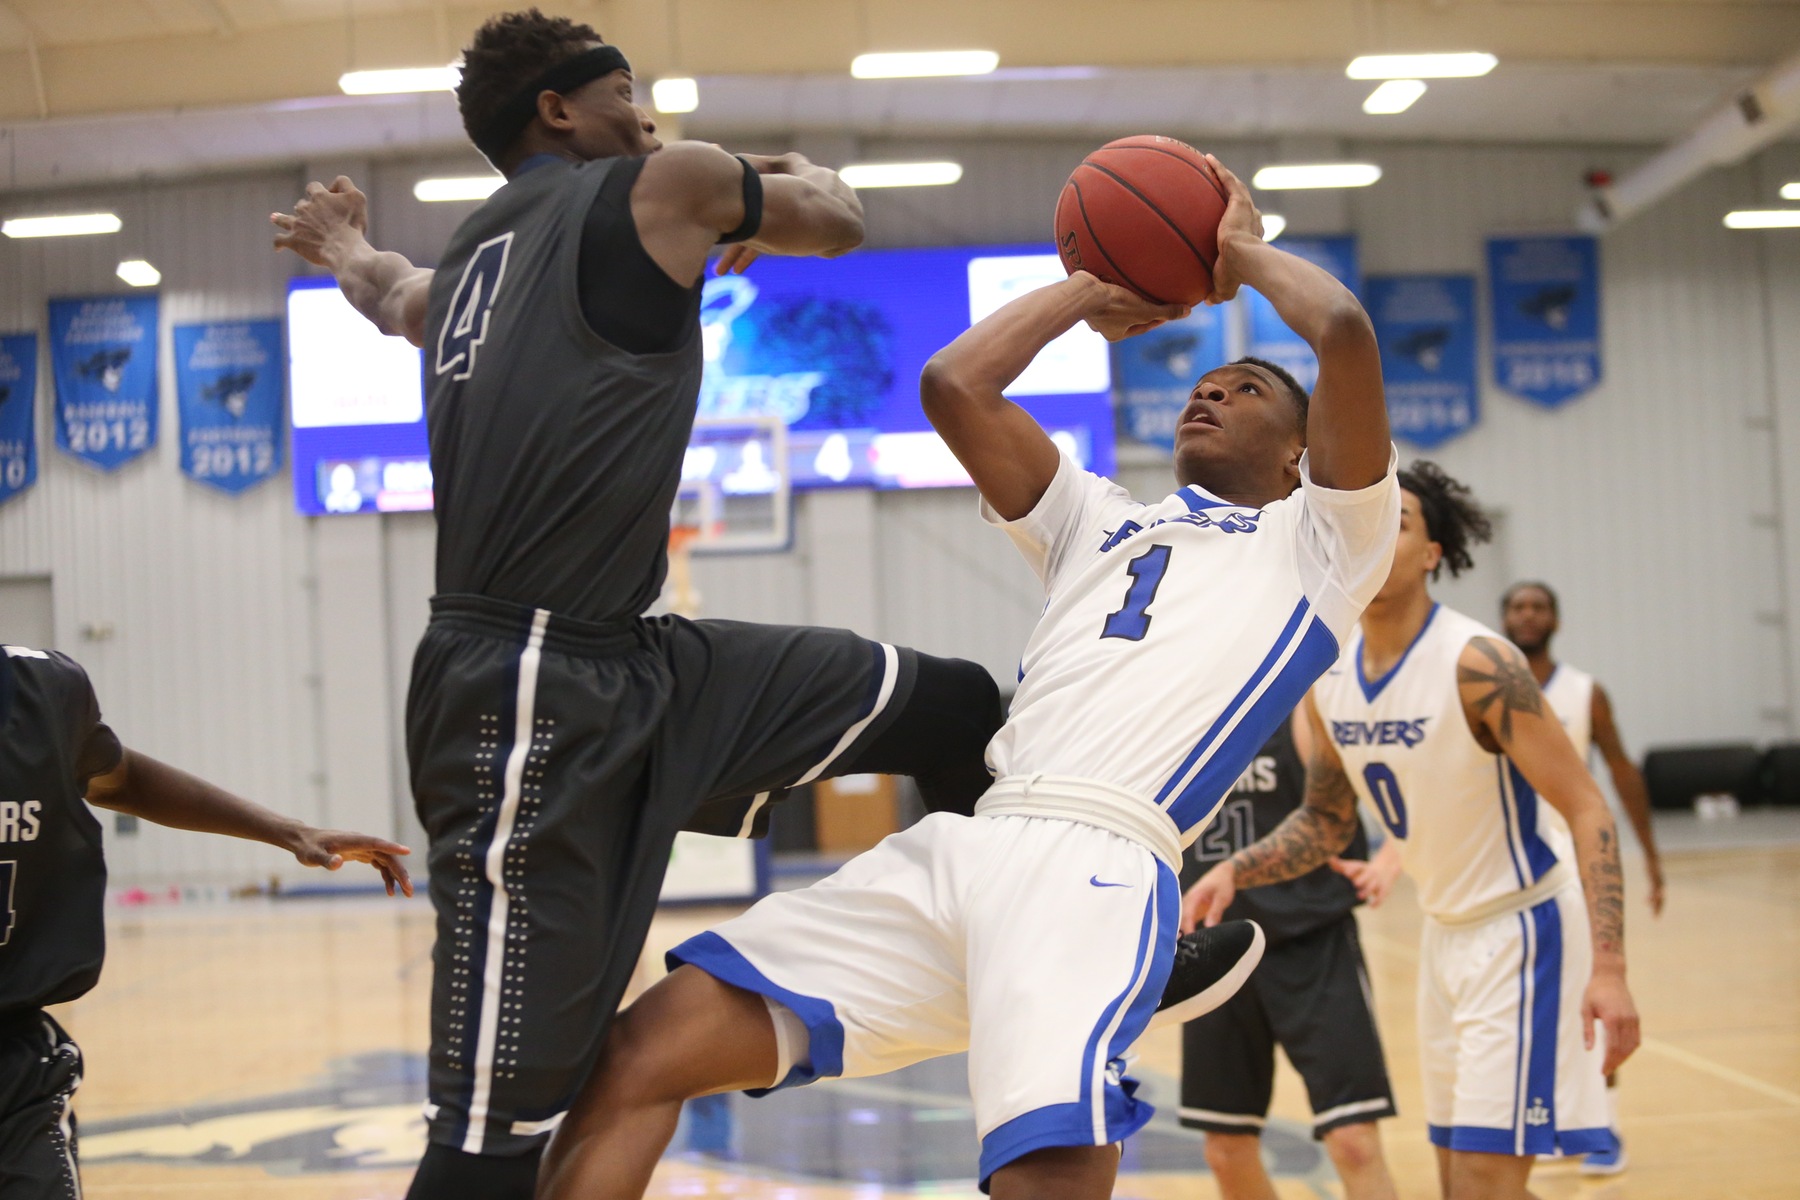 Decardo Day's ten points and season high eight assists helped lead the #22 Reivers to an emphatic 94-64 conference victory over Southeastern Wednesday night (1/24/18) at Reiver Arena.